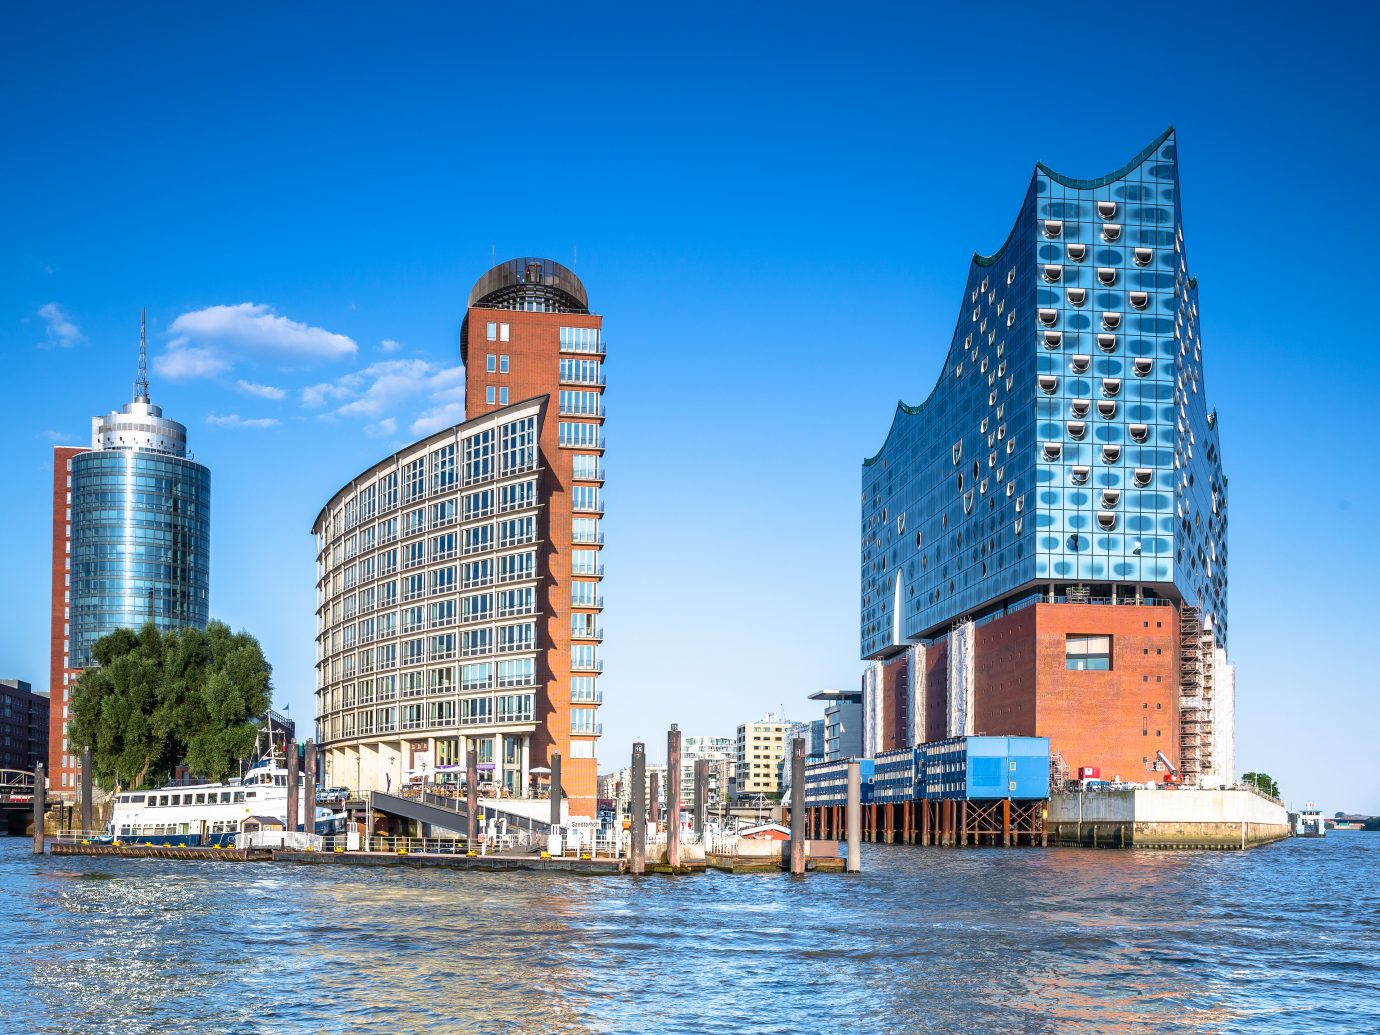 Front view of the new Elbphilharmonie